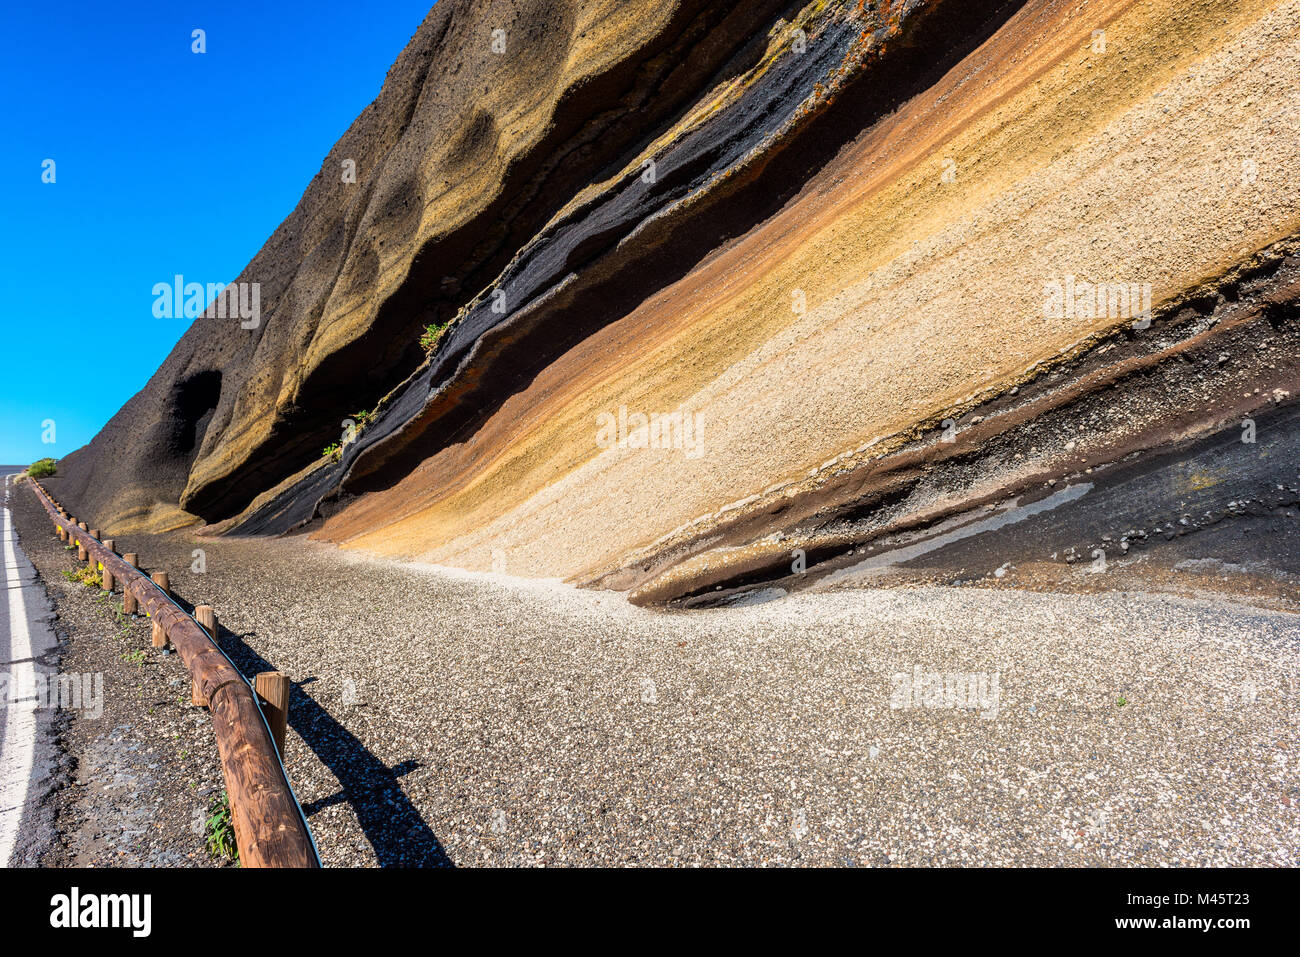 Sediment layers along the road in El Teide National Park, Tenerife, Canary Islands, Spain Stock Photo